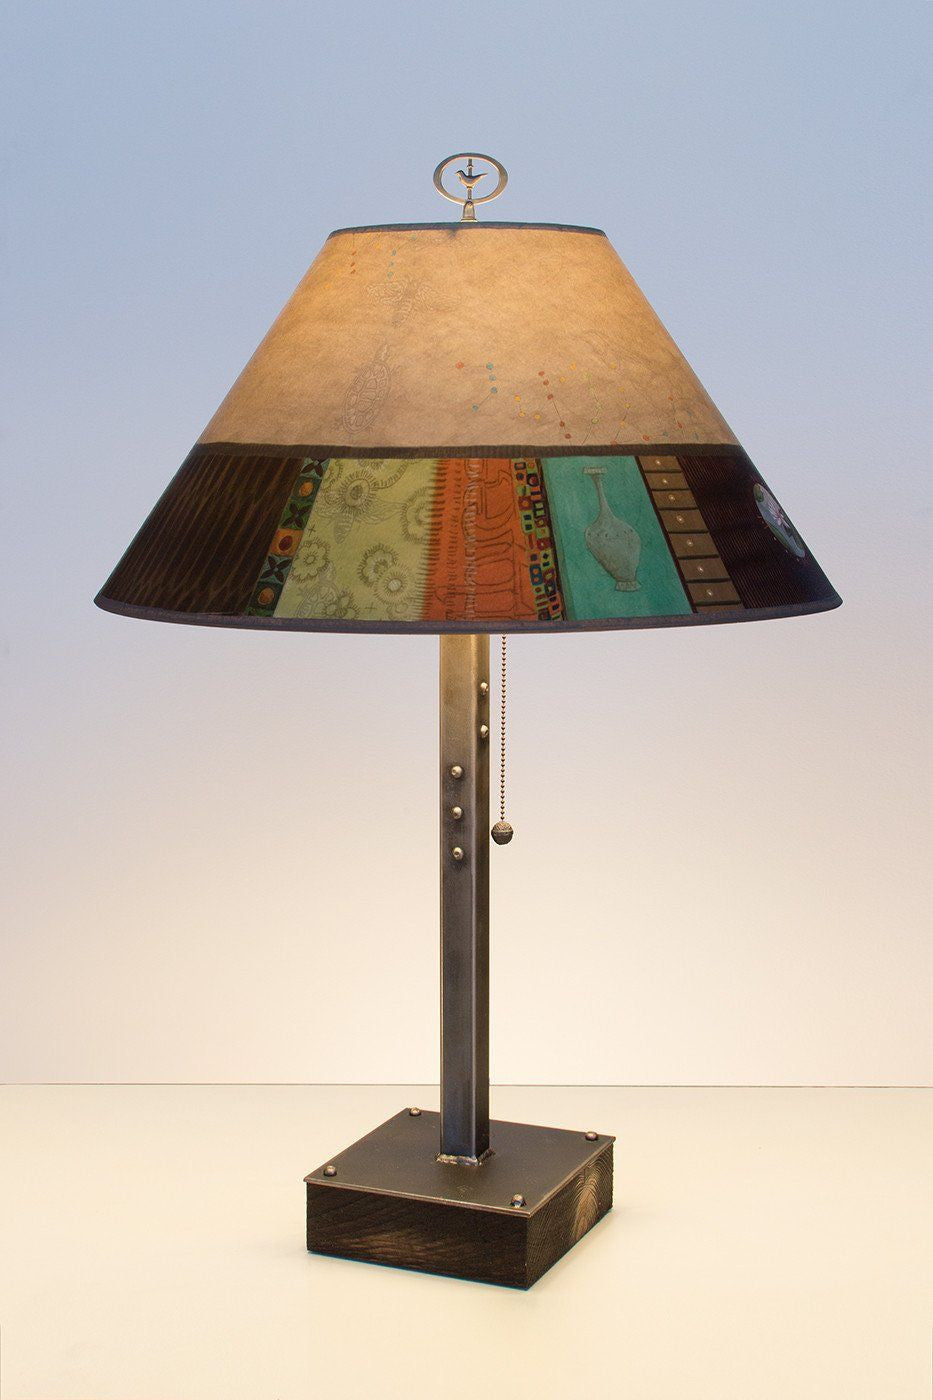 Janna Ugone & Co Table Lamps Steel Table Lamp on Wood with Large Conical Shade in Linen Match